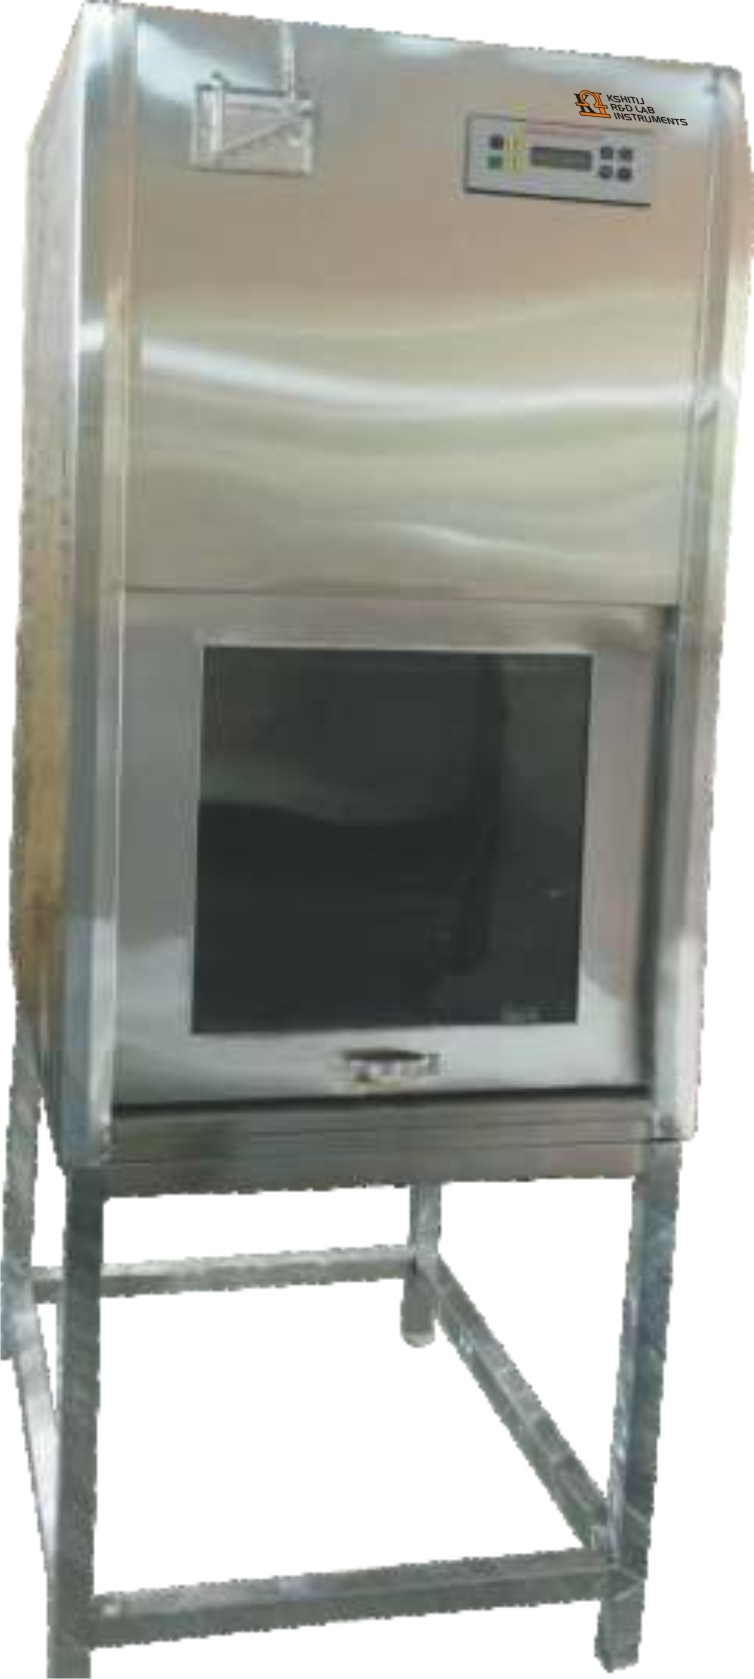 controller/assets/products_upload/Laminar Air Flow S.S. Vertical, Model No.: KI - 2128XV